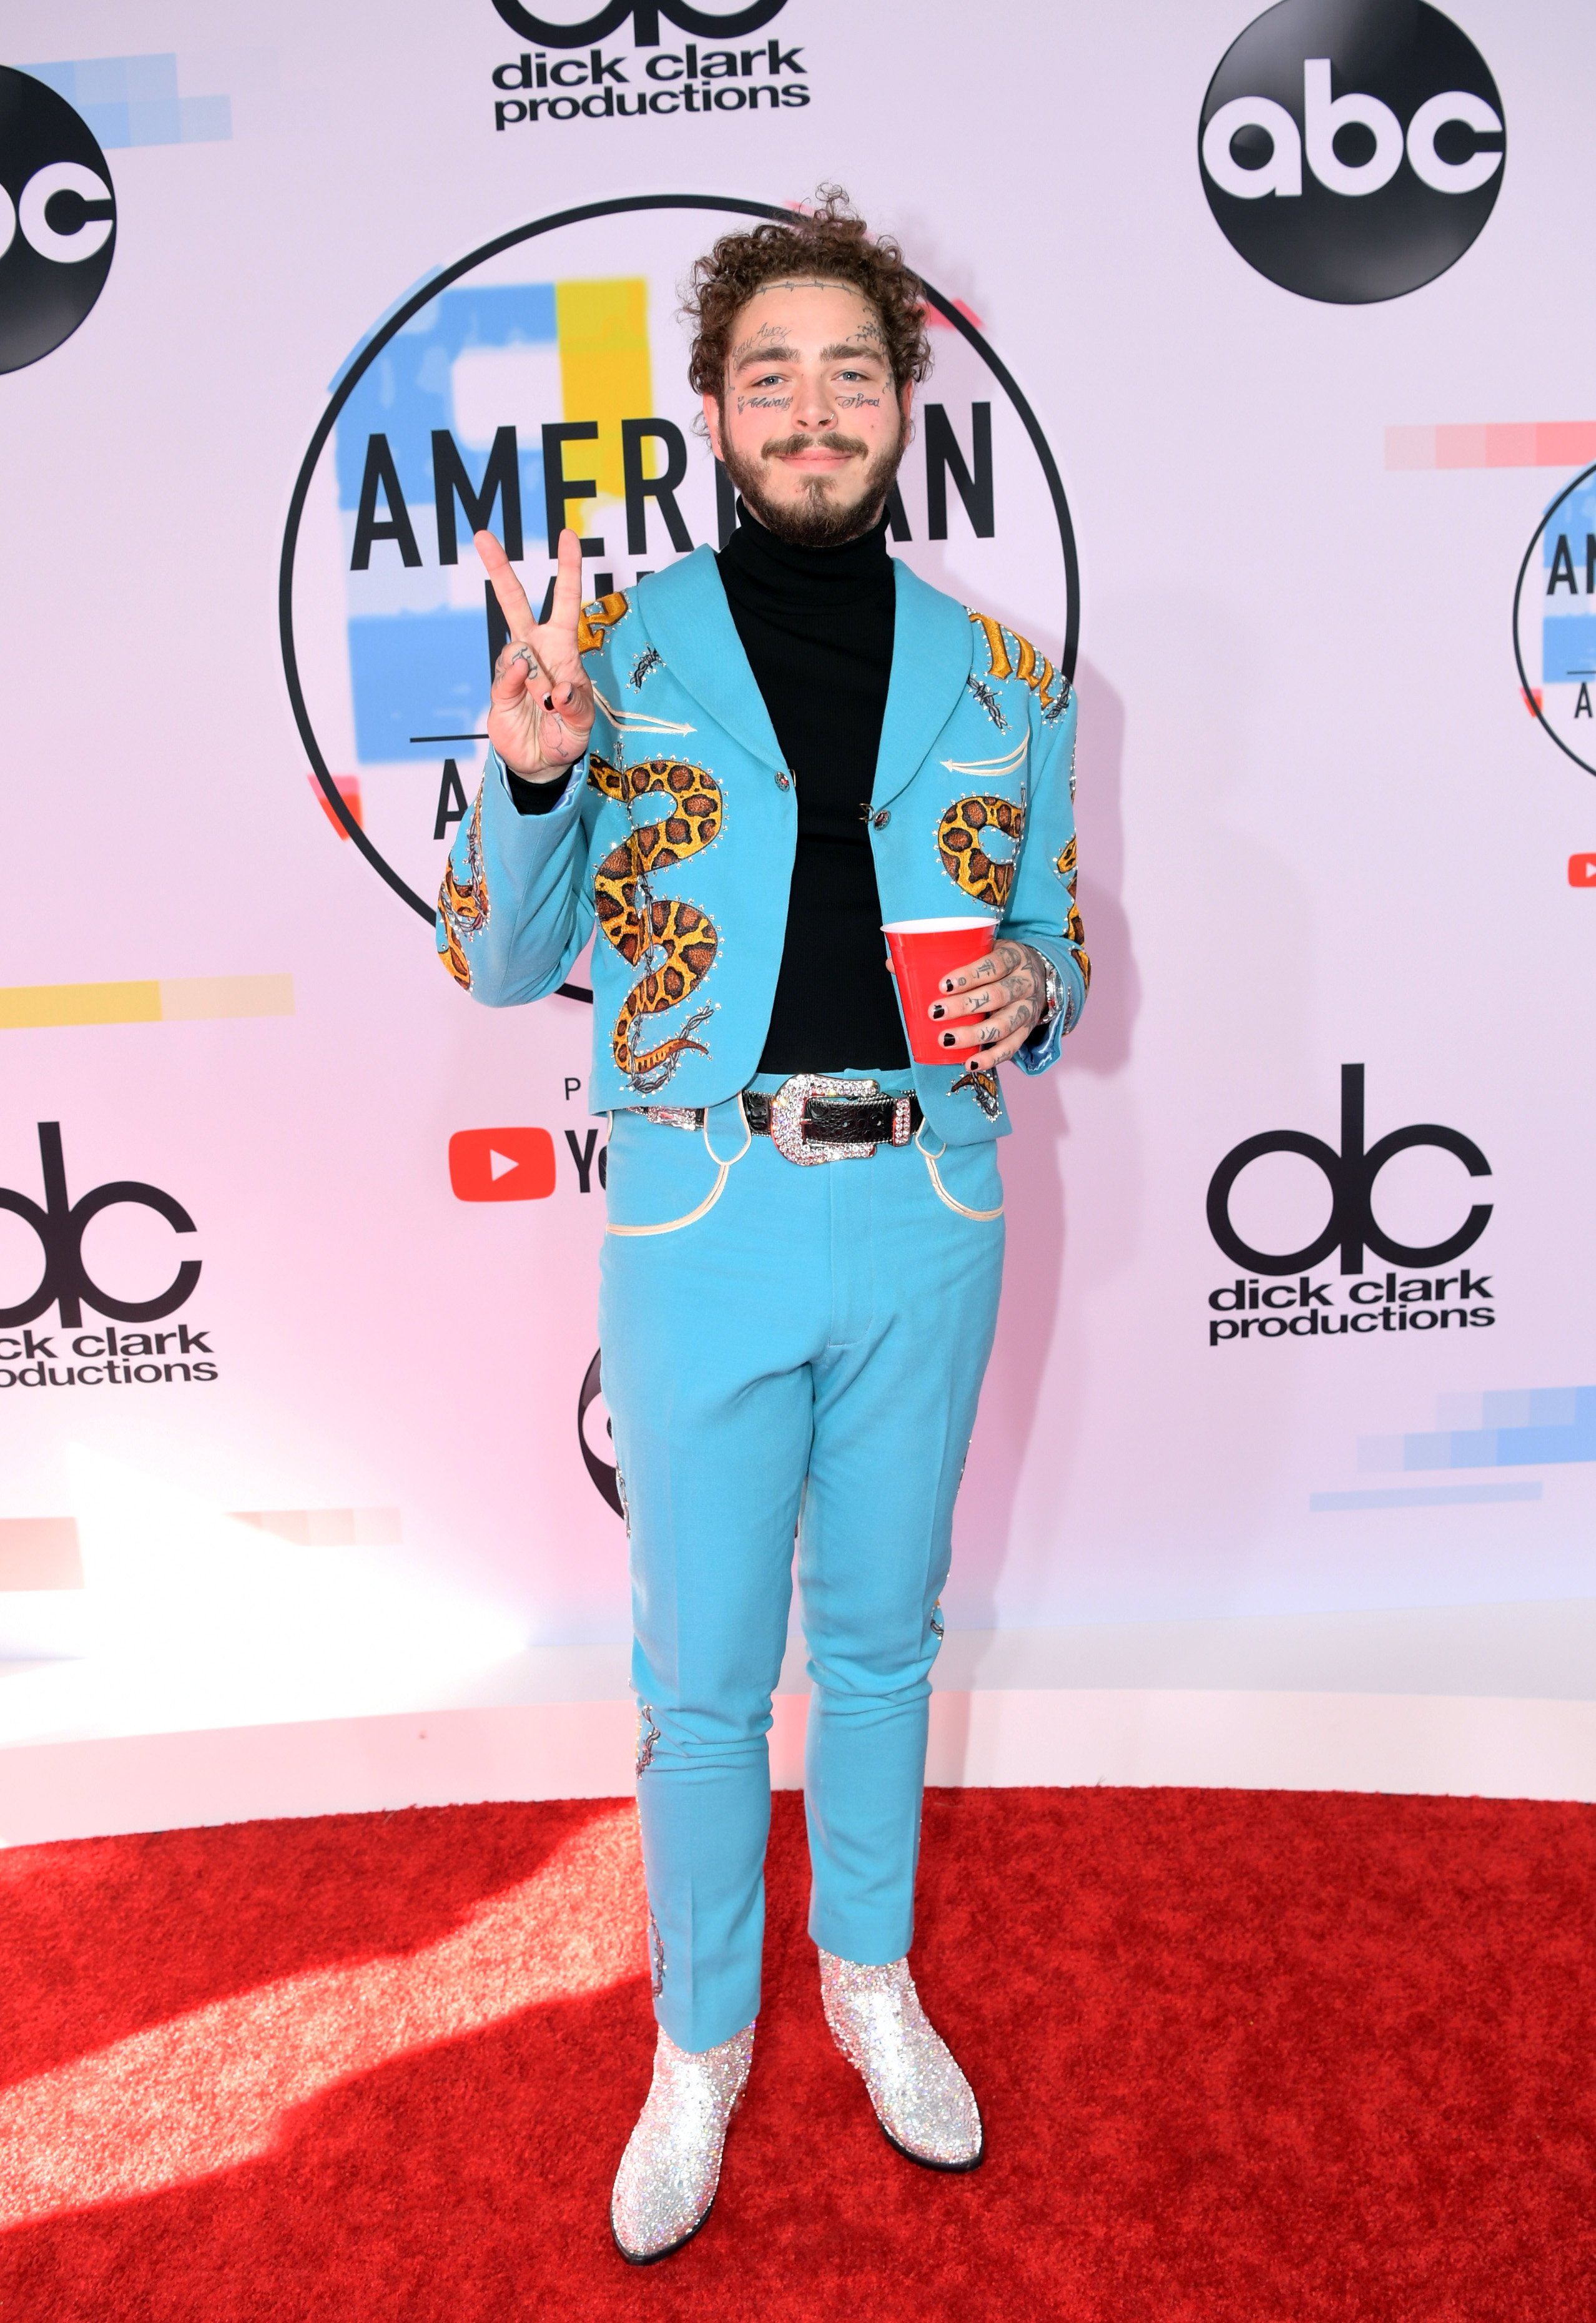 Post Malone at the 2018 American Music Awards at Microsoft Theater on October 9, 2018 in Los Angeles, California. | Source: Getty Images